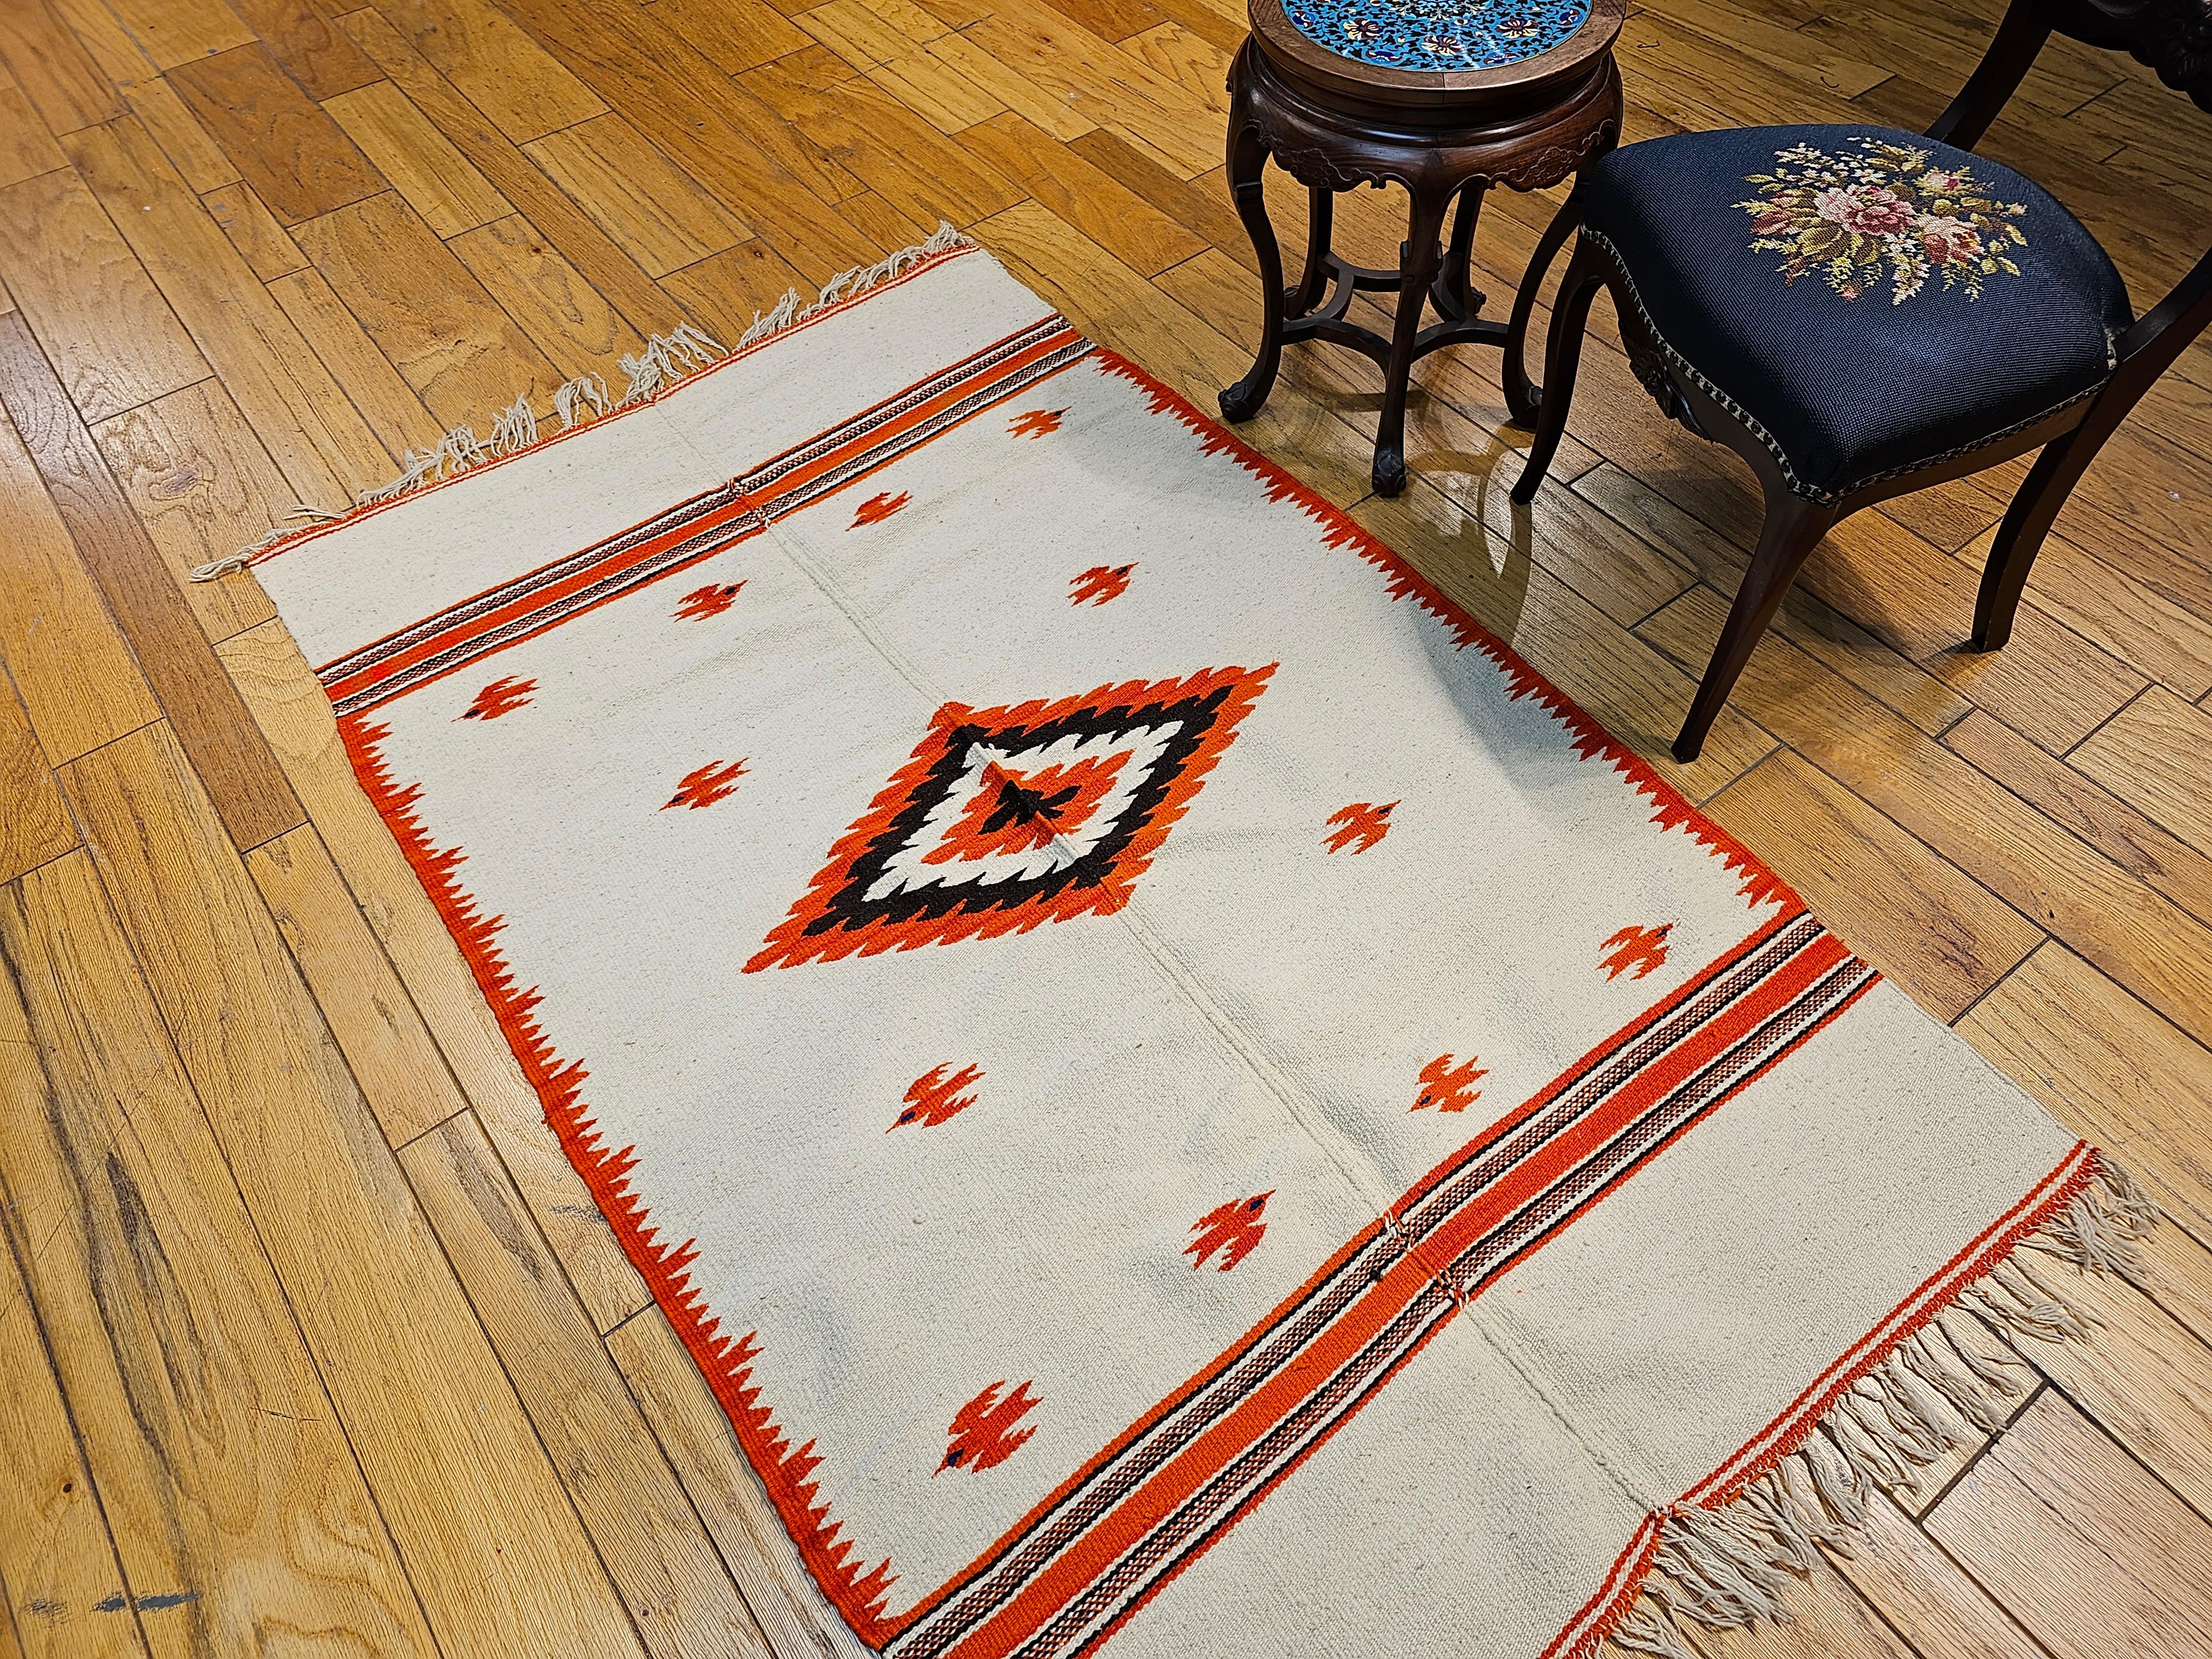 Vintage Mexican Serape Saltillo Kilim Rug with Mythical Bird Designs For Sale 2